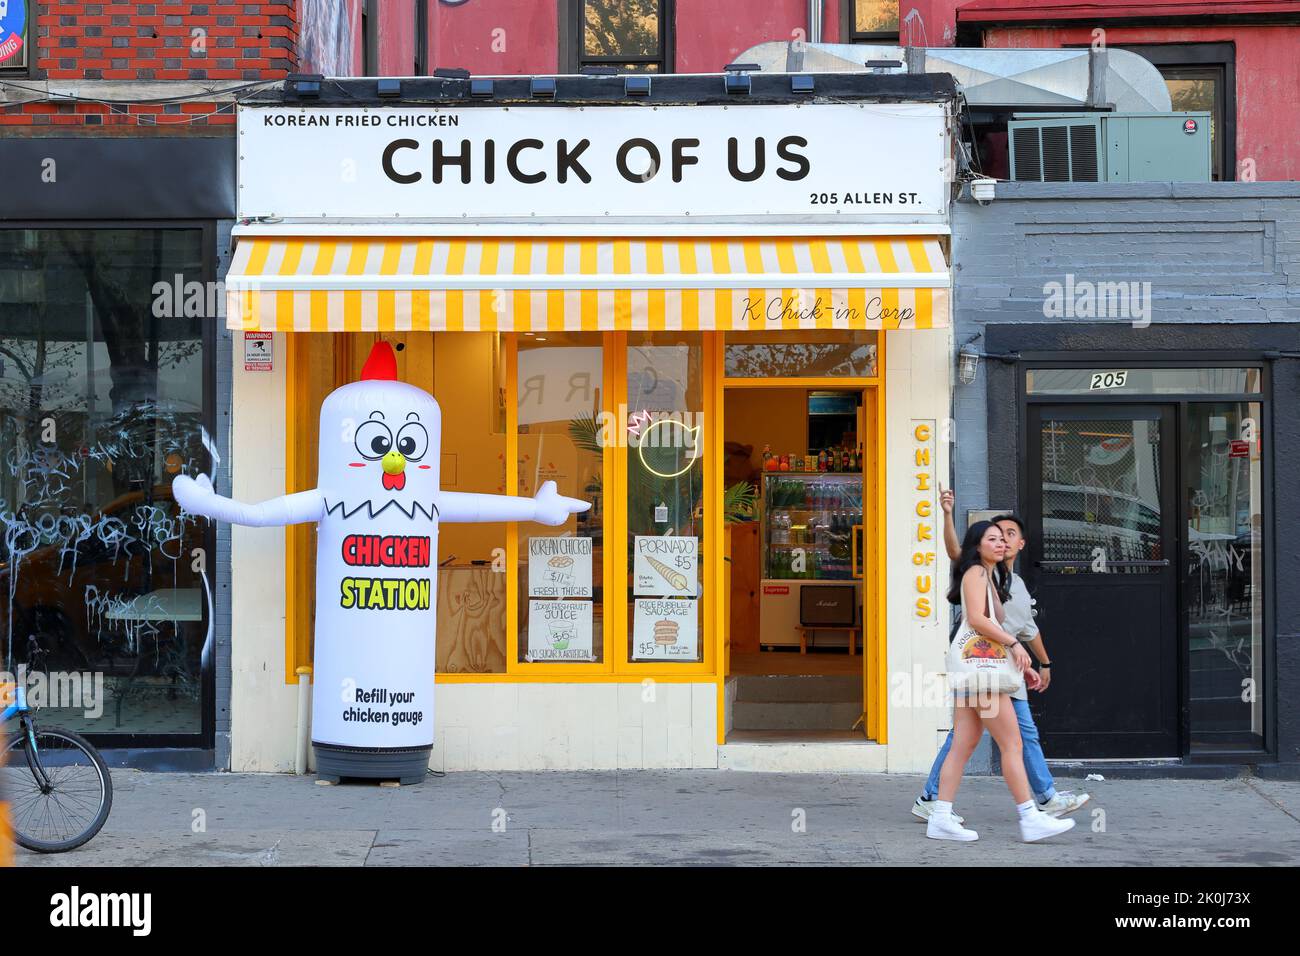 Chick Of Us, 205 Allen St, New York, NYC storefront photo of a Korean fried chicken restaurant in Manhattan's Lower East Side. Stock Photo